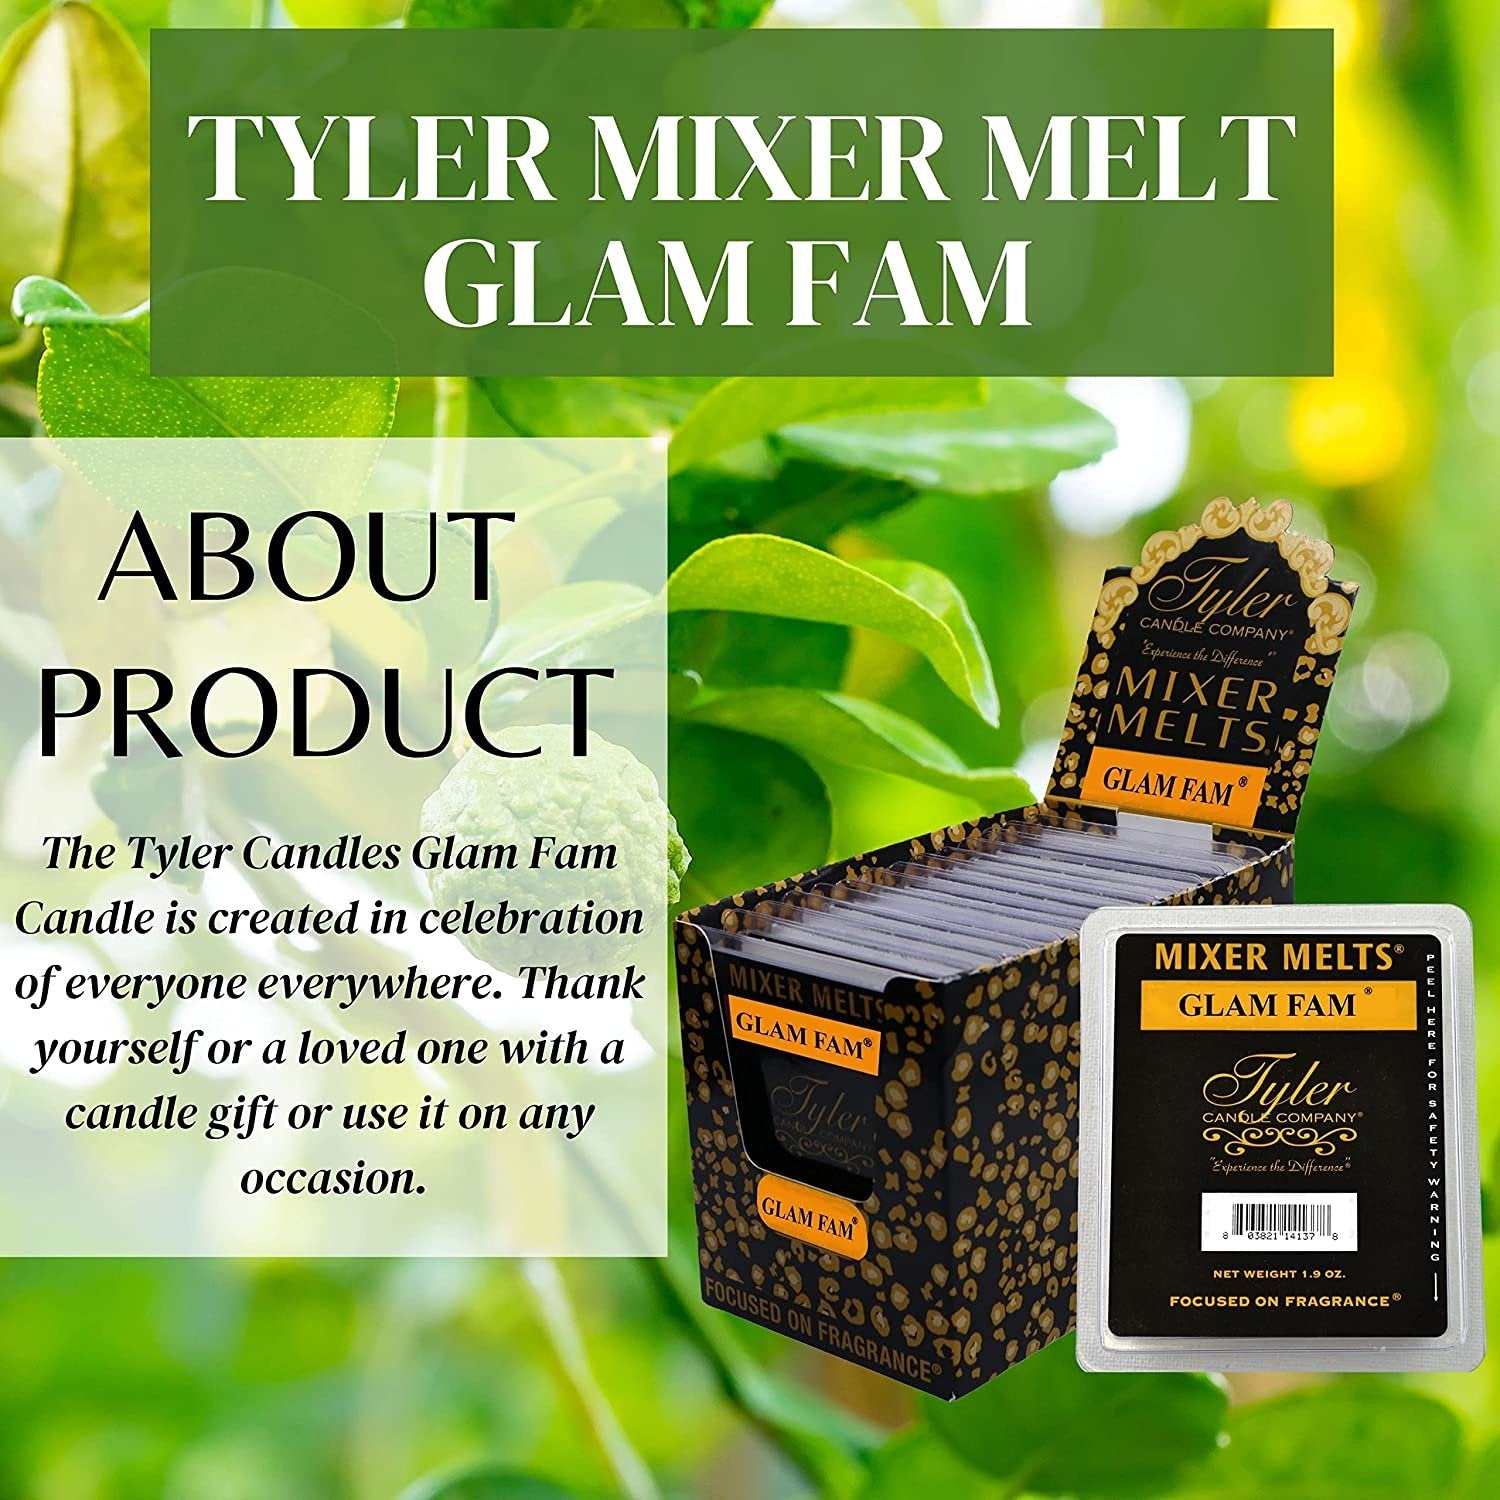 Tyler Candle Company Glam Fam Scent Wax Melts - Soy Wax Scented Mixer